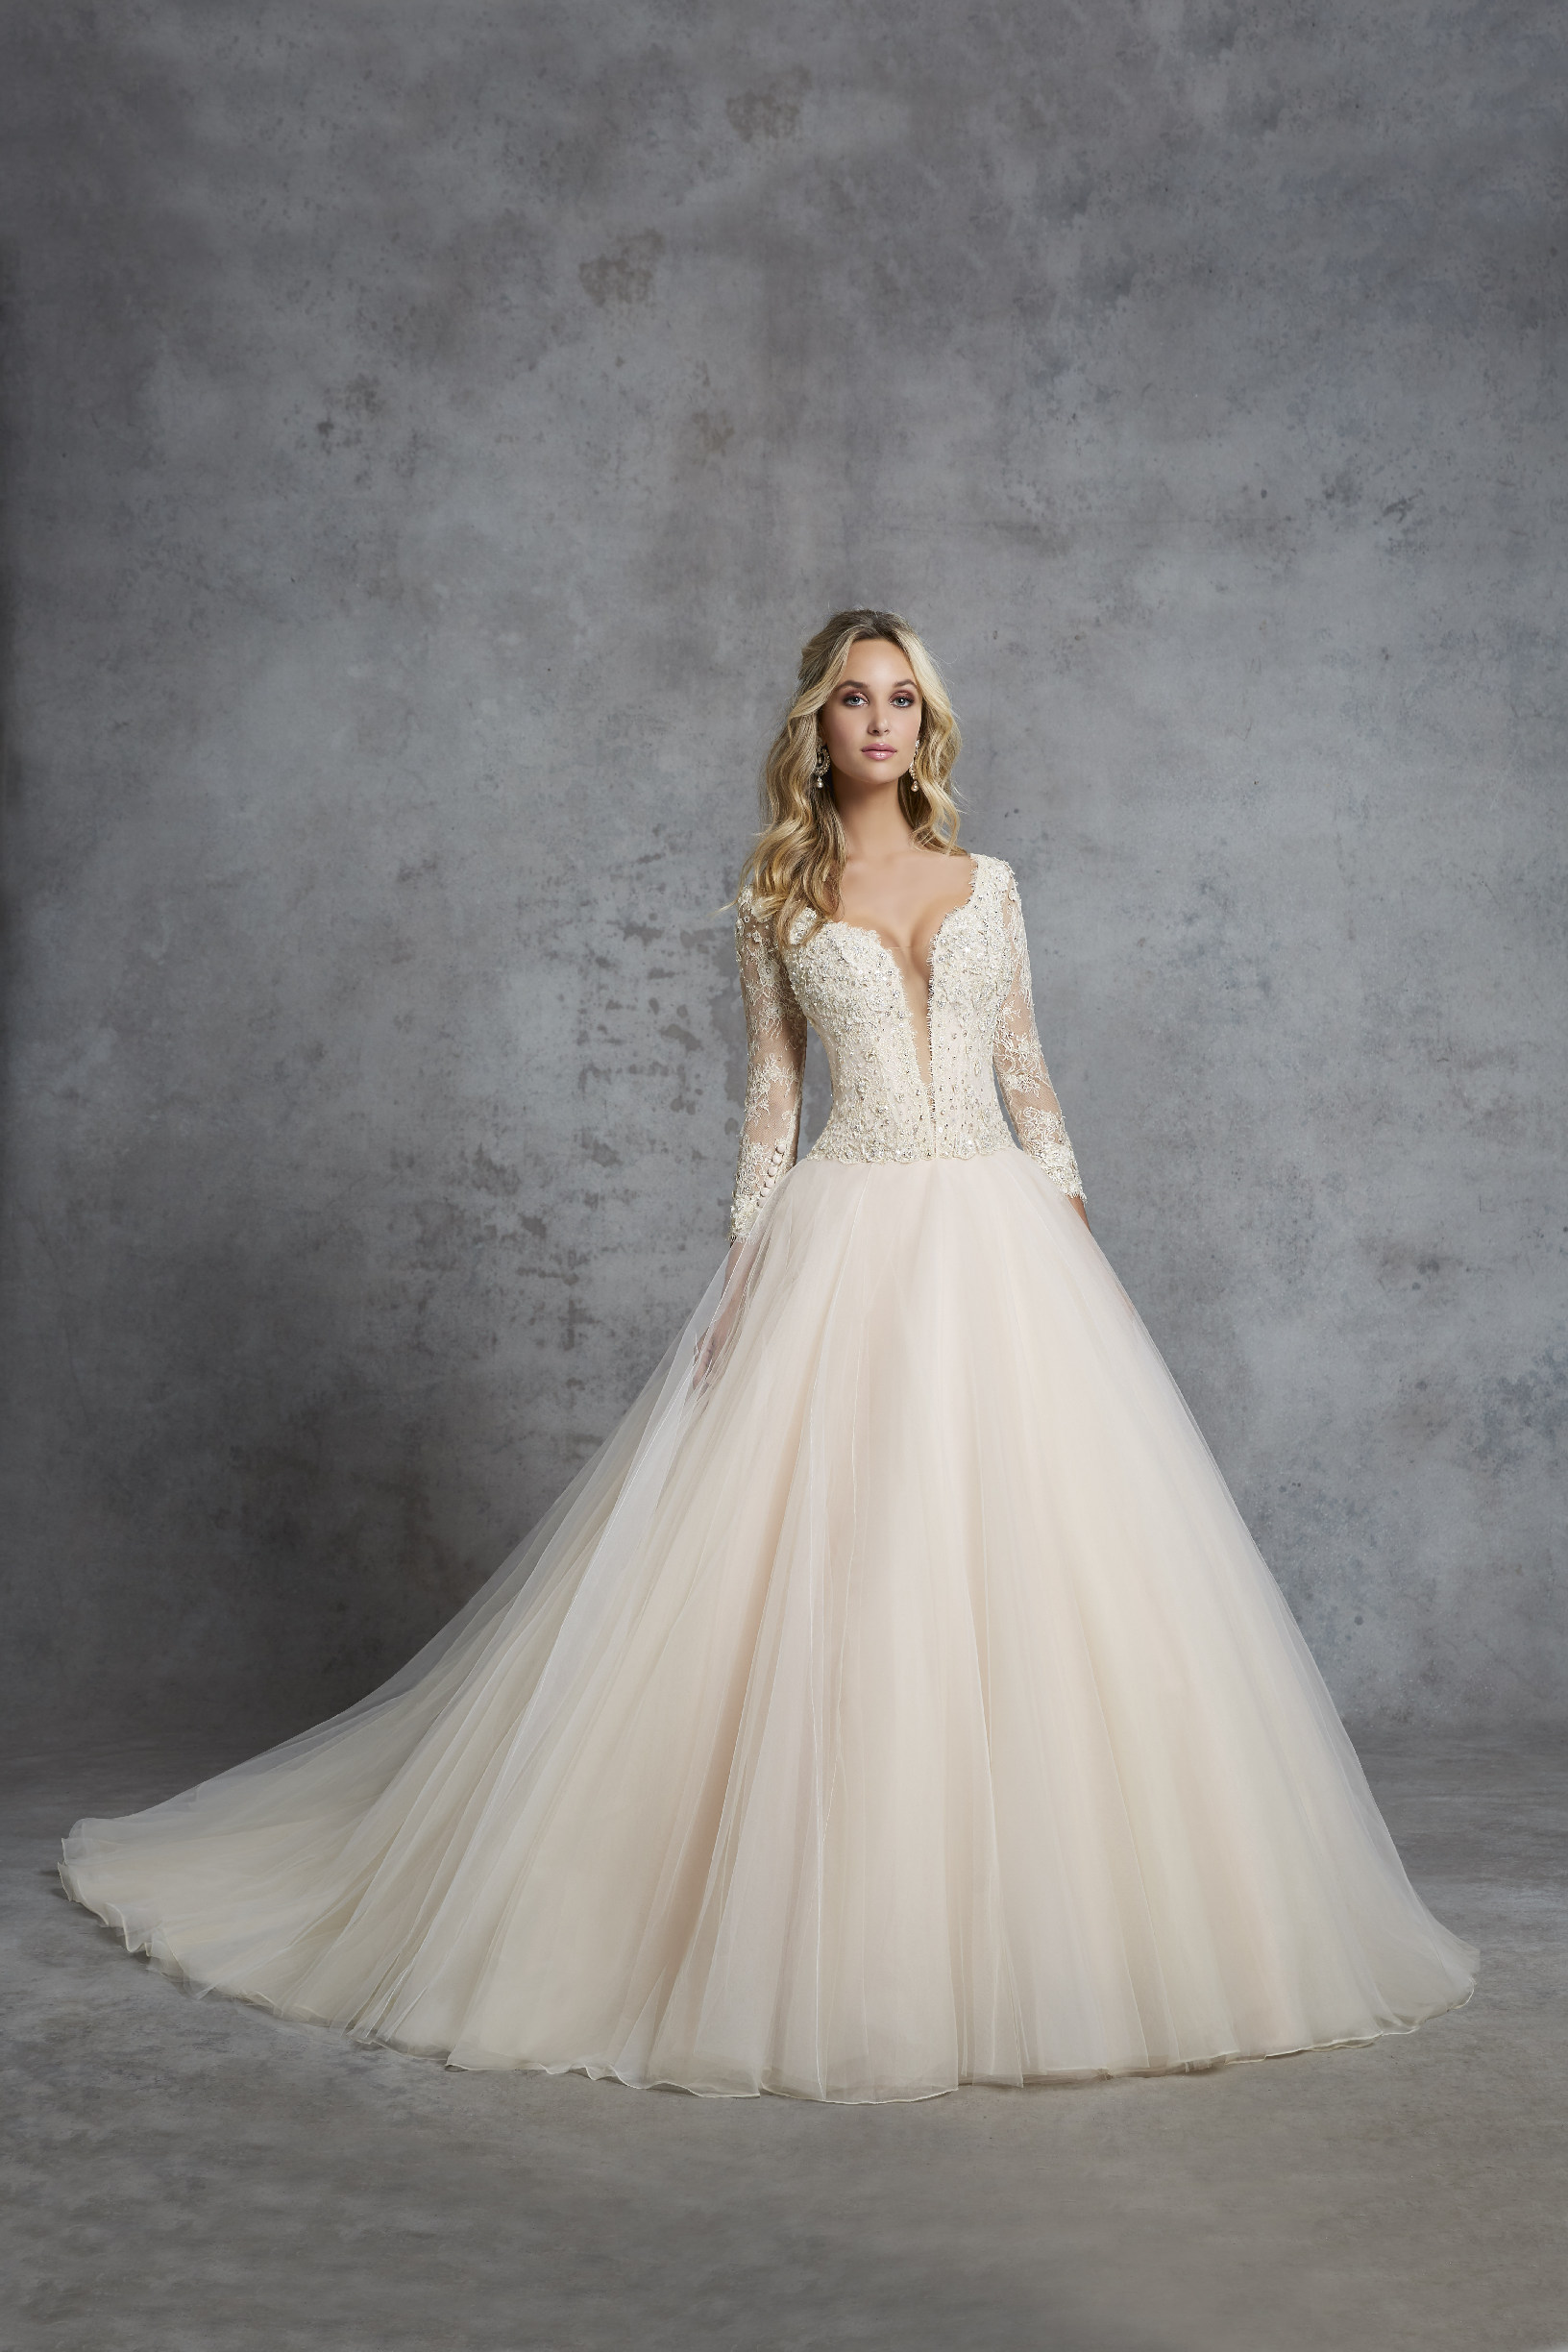 Model in Ronald Joyce 69424, a pale gold ballgown wedding dress silhouette with a sequin lace body, plunging v-neckline, long lace sleeves and a plain tulle skirt